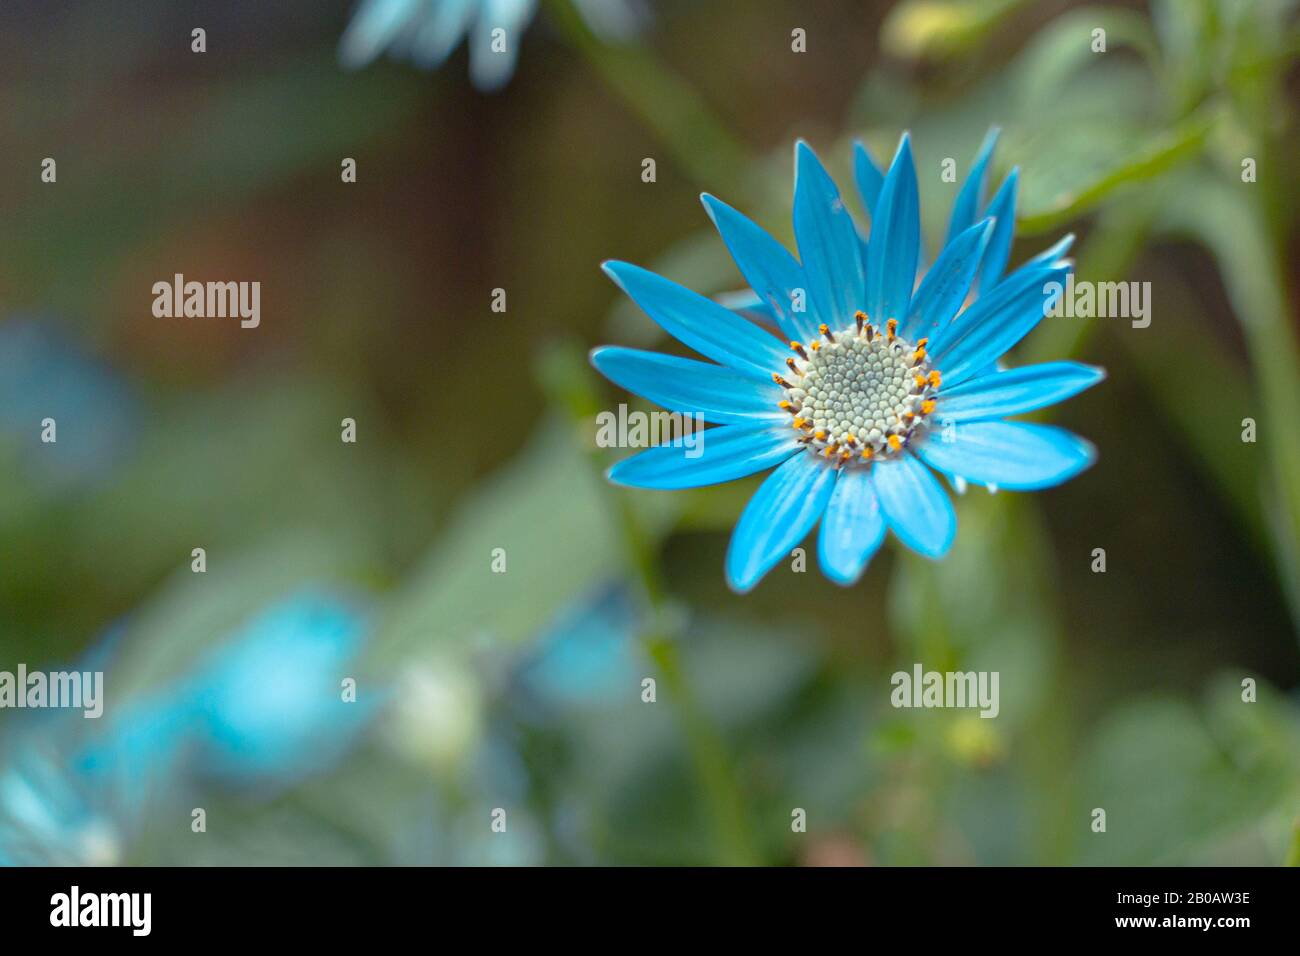 A Blue Daisy with Blurry Background at Flower Garden Stock Photo